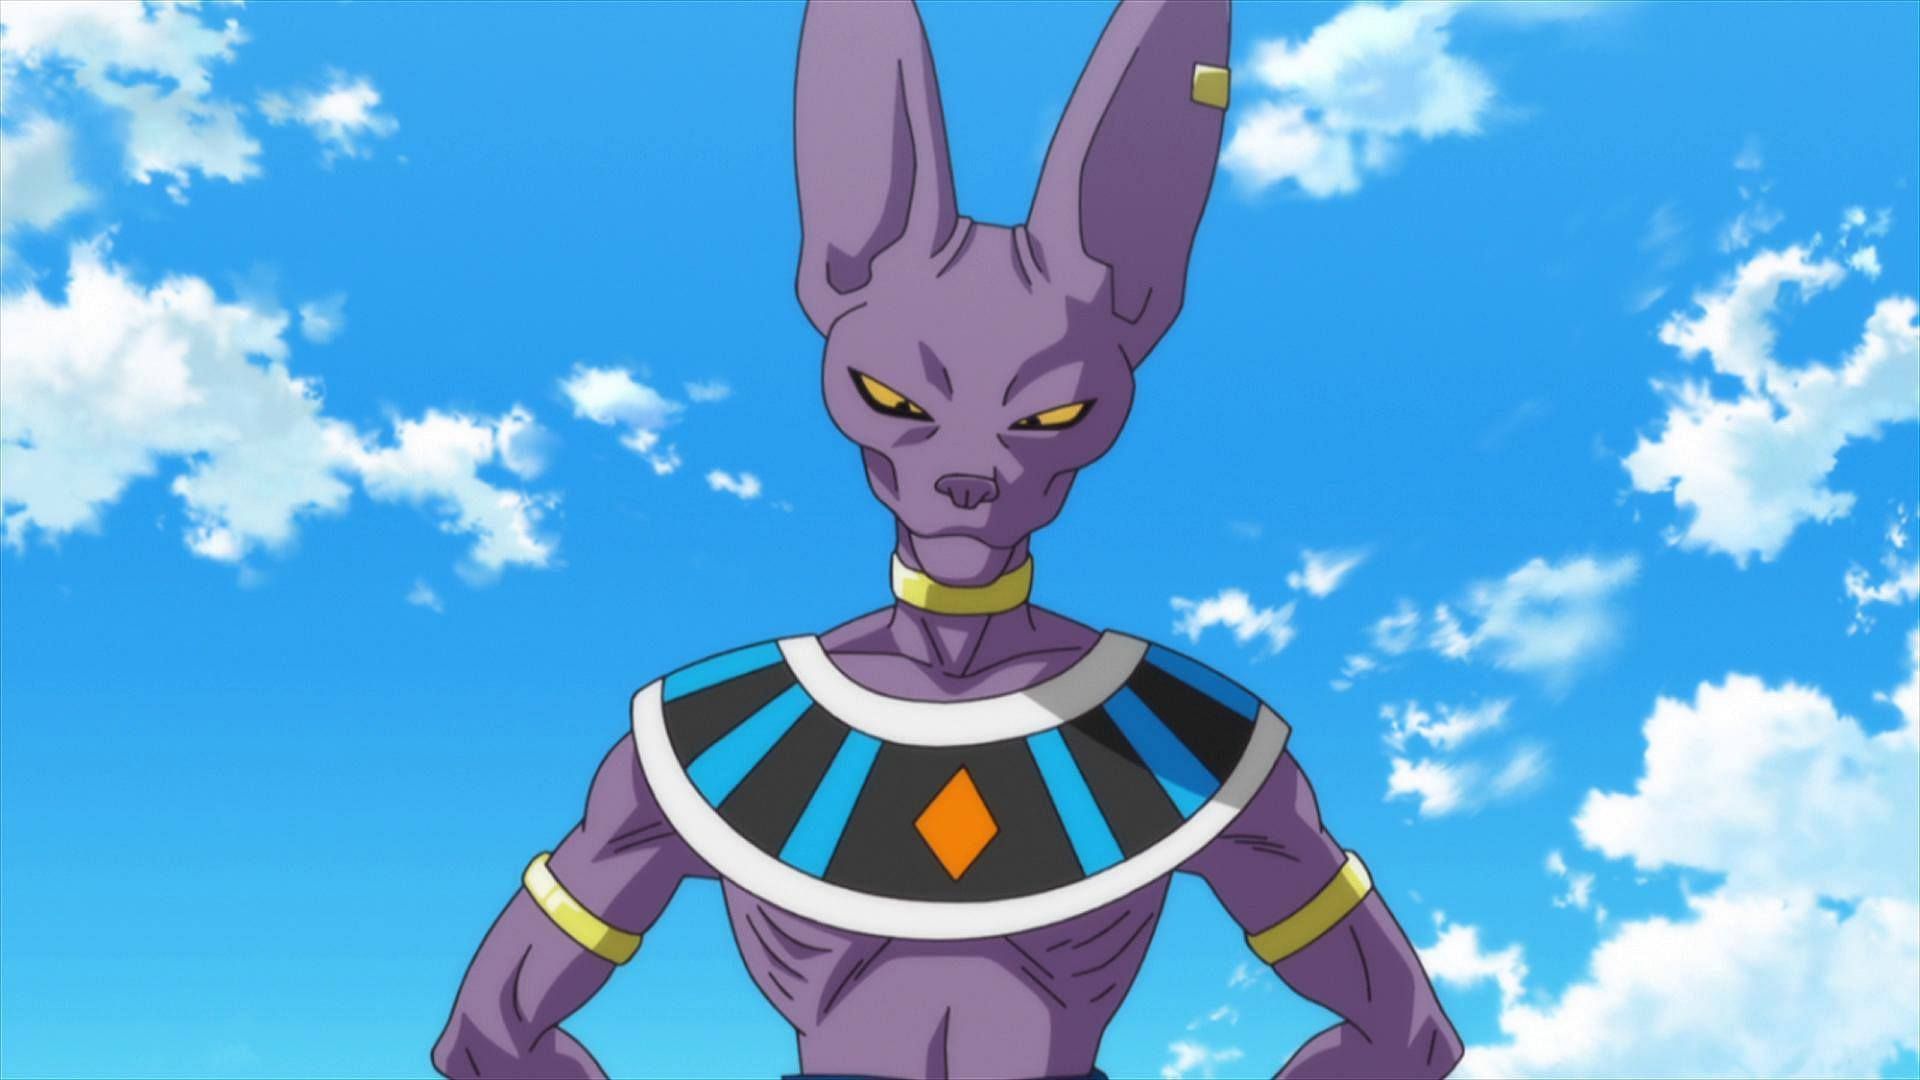 Beerus as seen in the show (Image via Toei Animation)